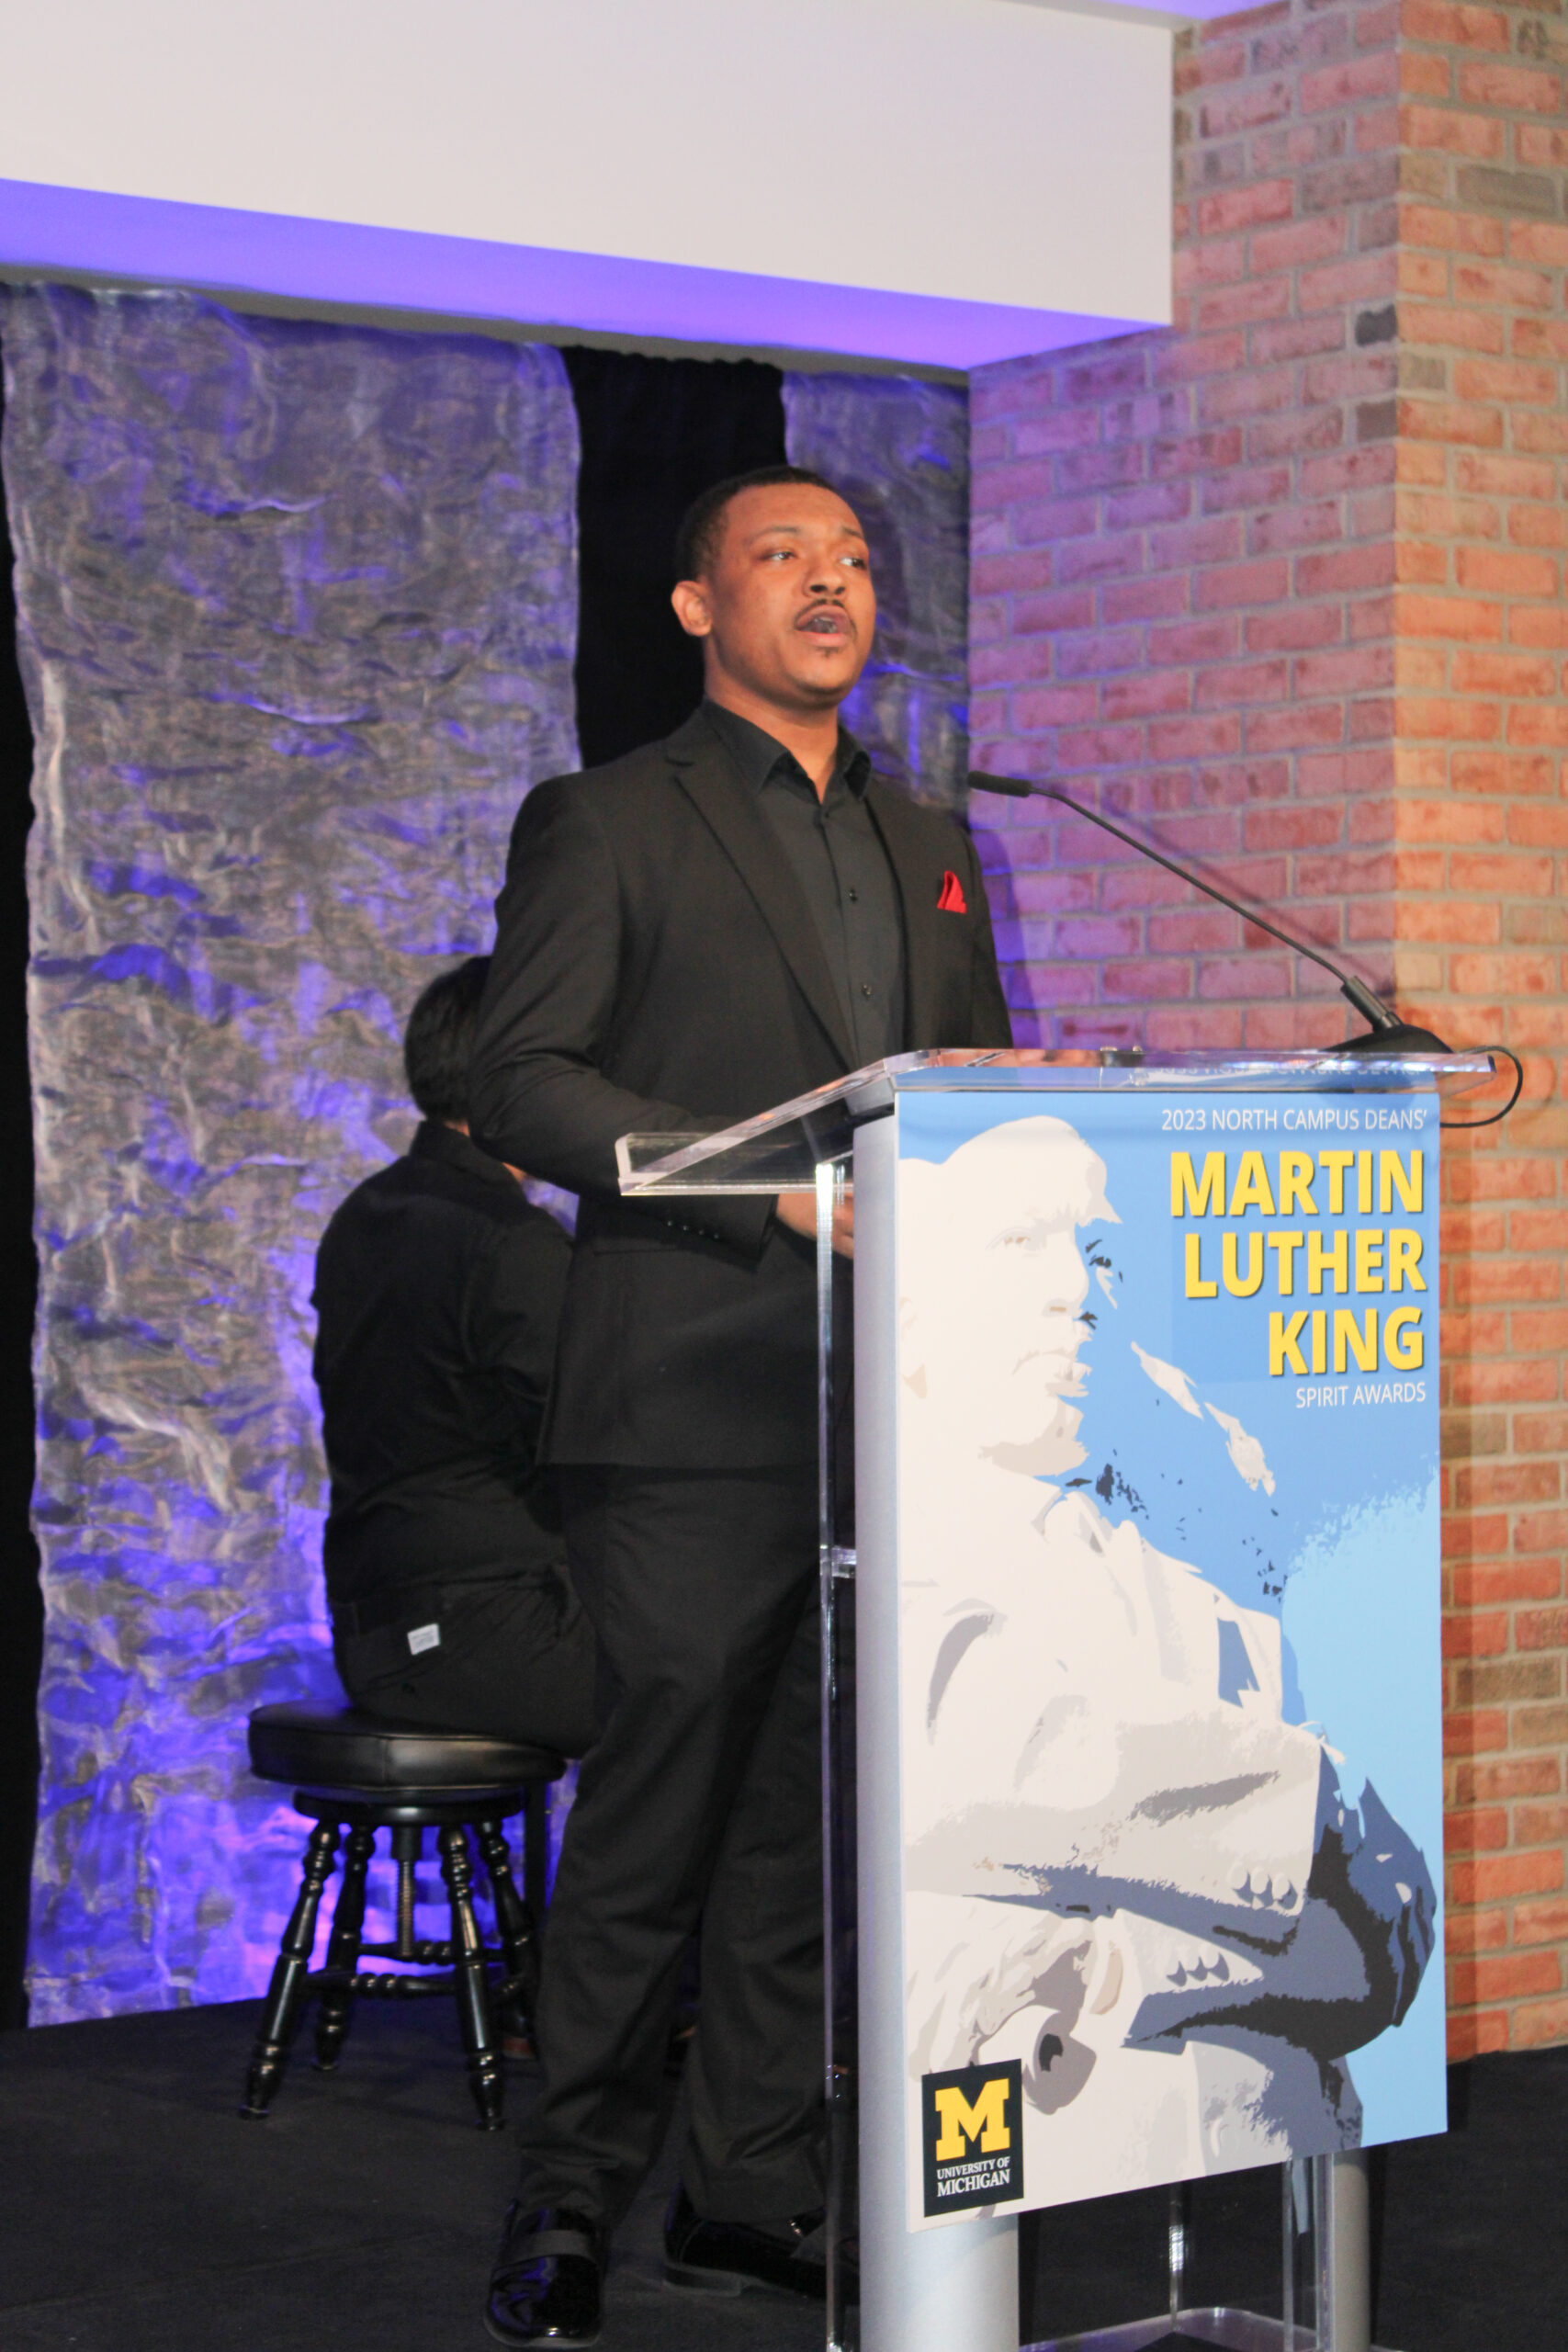 2023 NC Deans' MLK Spirit Awards — Tyrese Byrd (Vocalist) and Joshua Marzan (Piano) performing "We Shall Overcome"